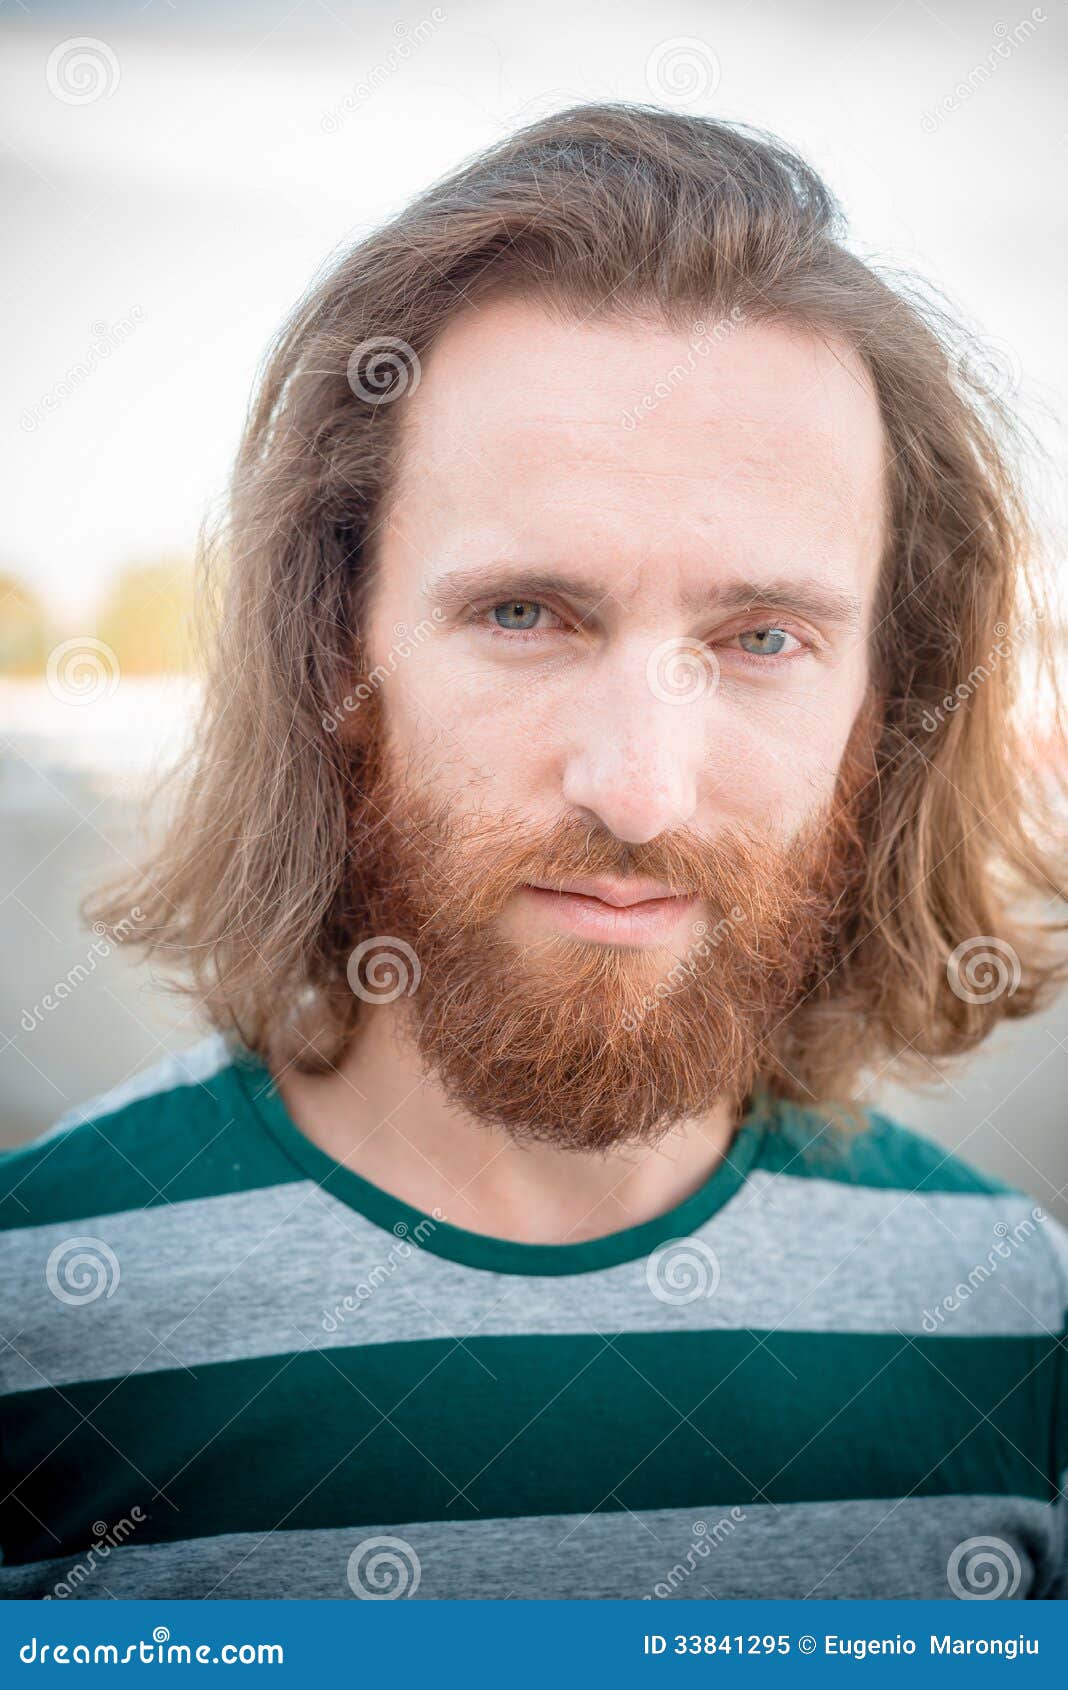 Stylish Hipster Model With Long Red Hair And Beard 